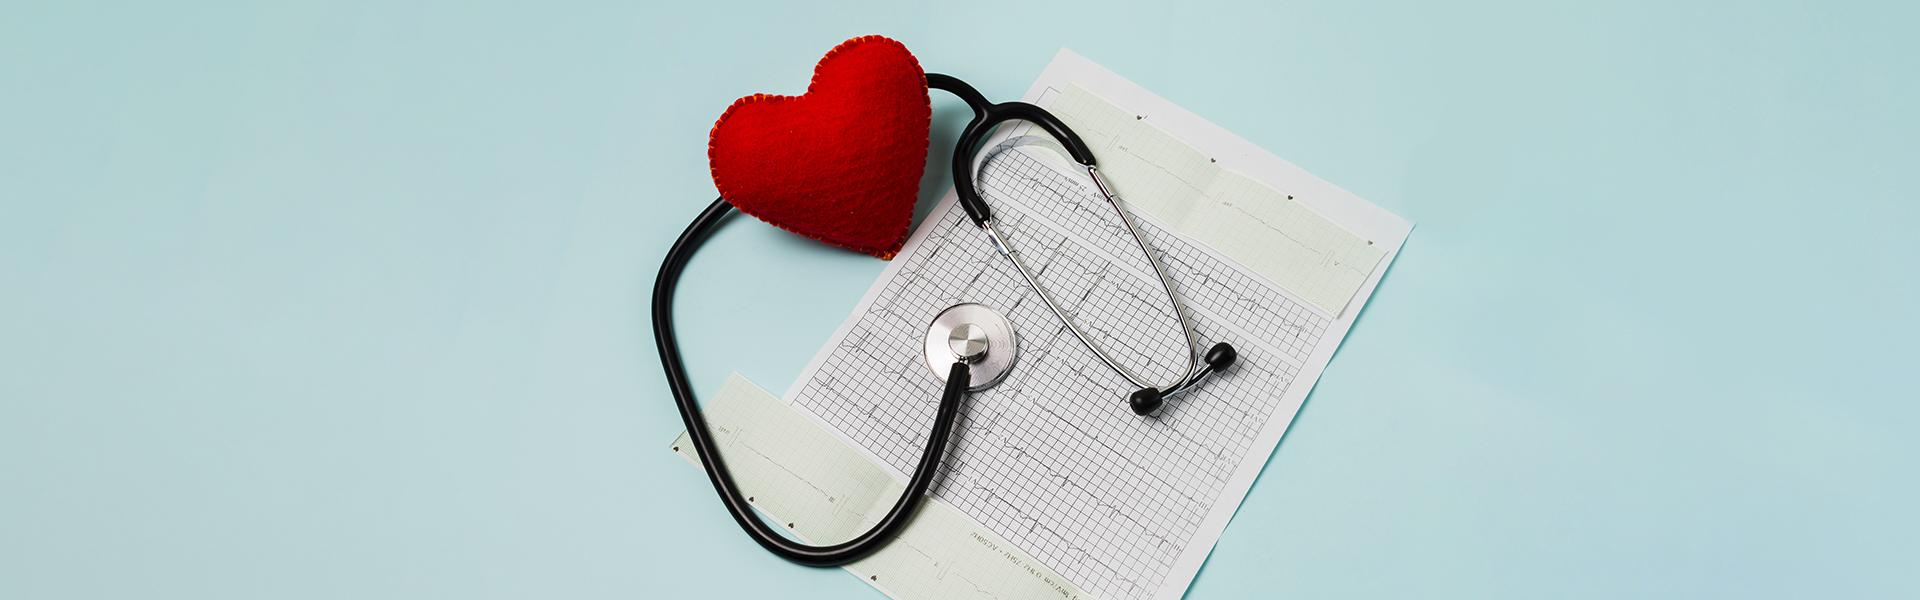 What are the Benefits of Having an EKG at Urgent Care Centers?